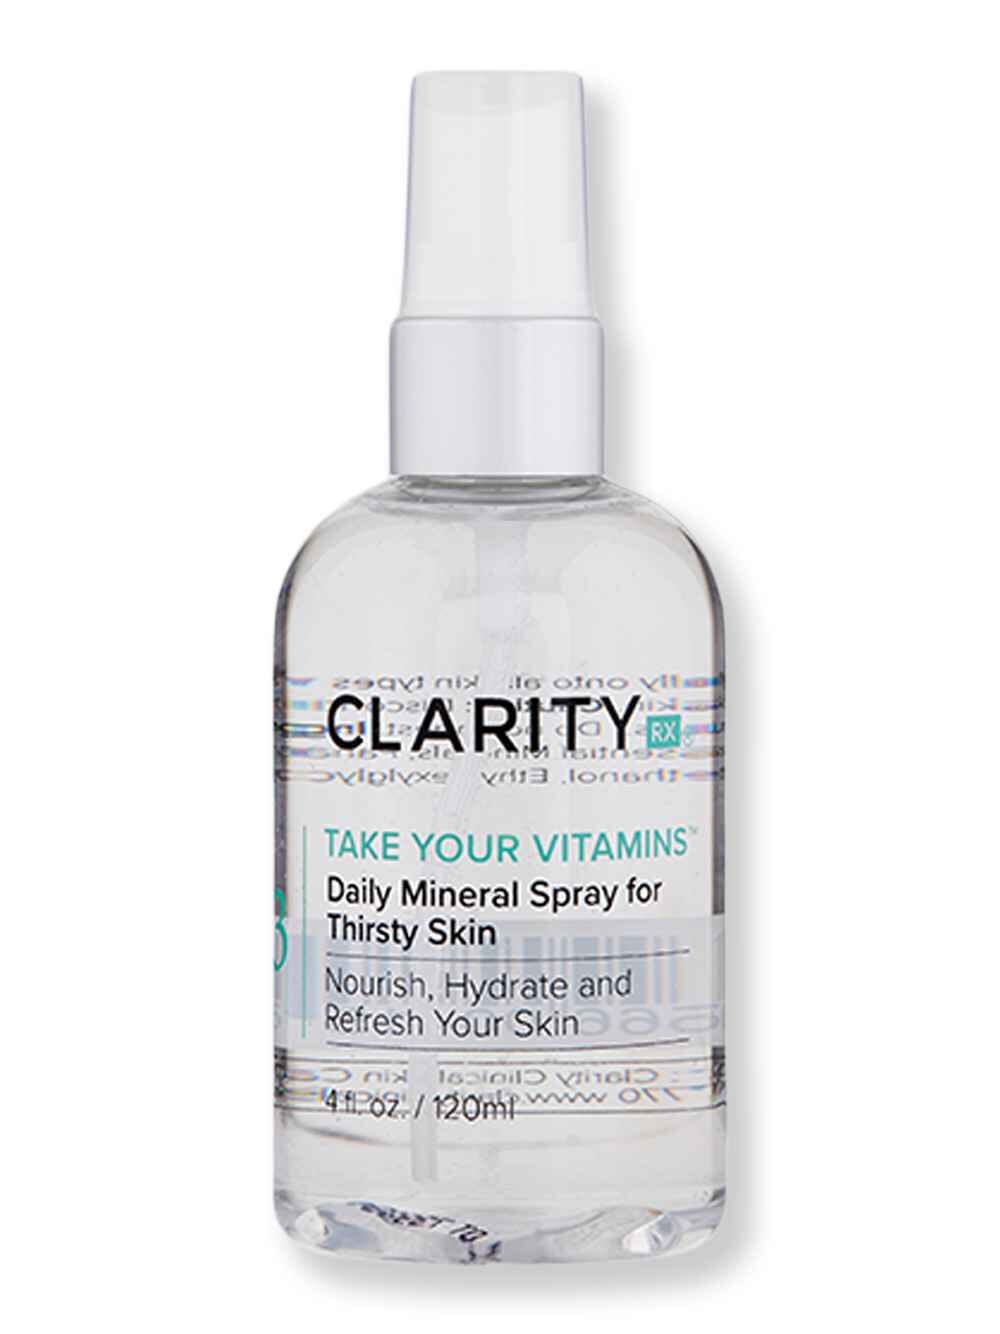 ClarityRx ClarityRx Take Your Vitamins Daily Mineral Spray For Thirsty Skin 4 oz Skin Care Treatments 